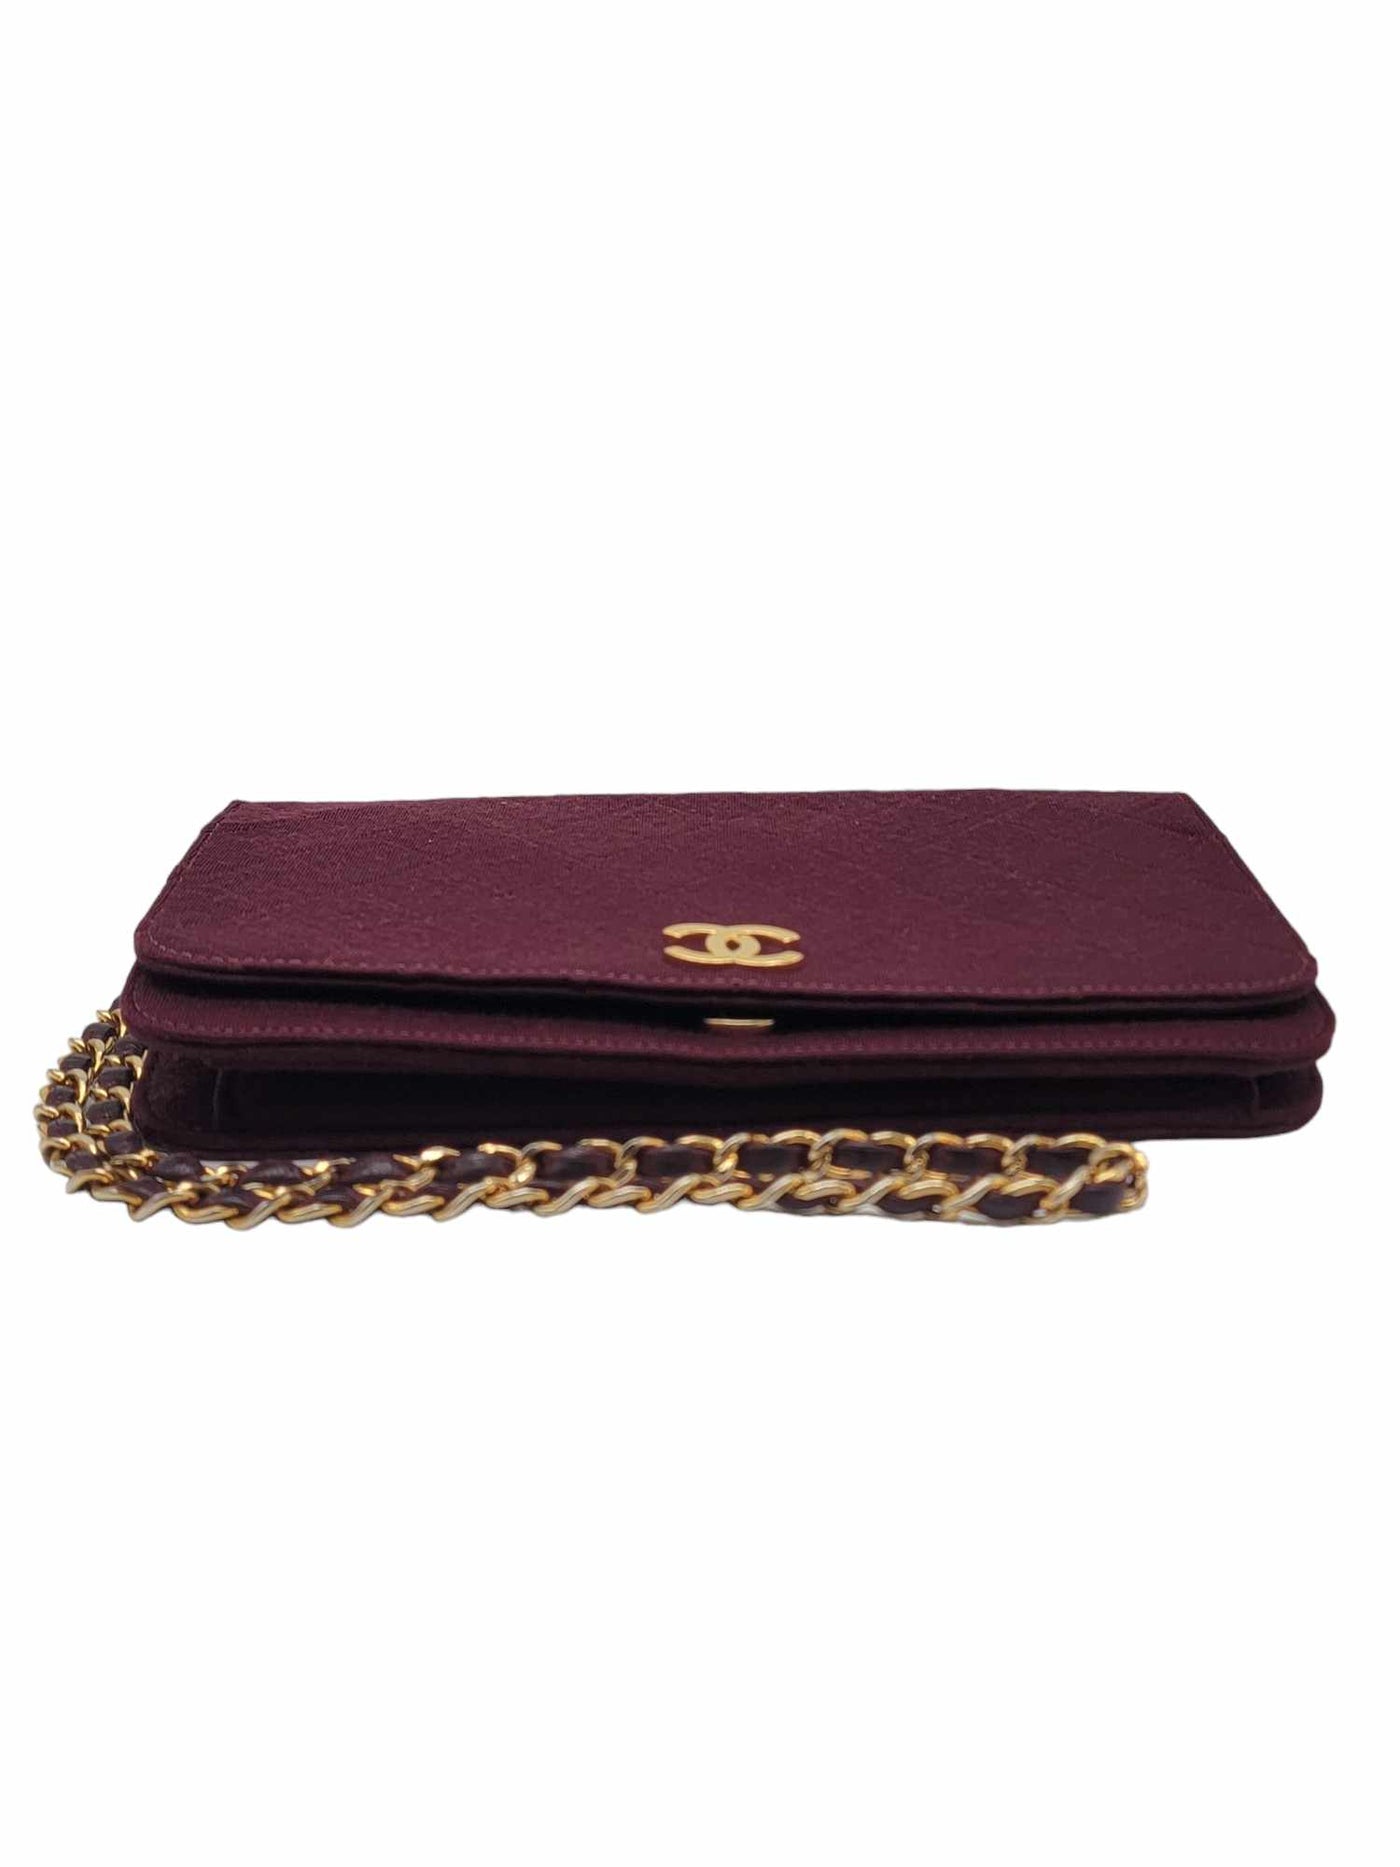 CHANEL Burgundy Quilted Jersey Clutch Bag